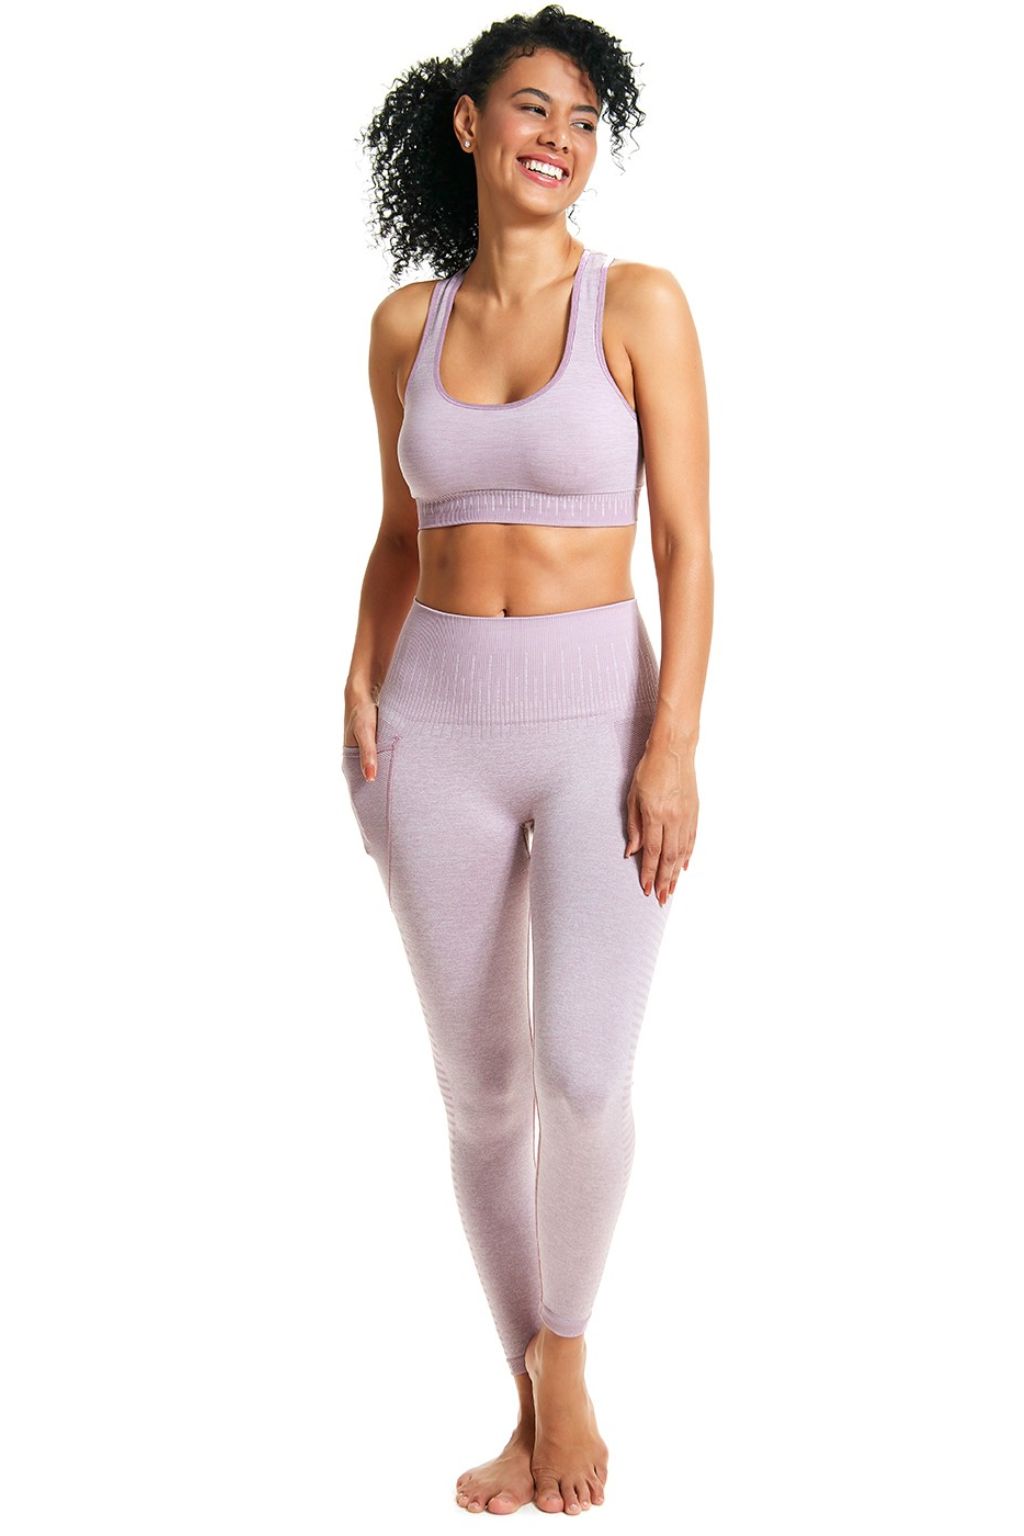 BASIC Top Fusion style Sport Bra with Removable Bulge - METRO BRAZIL